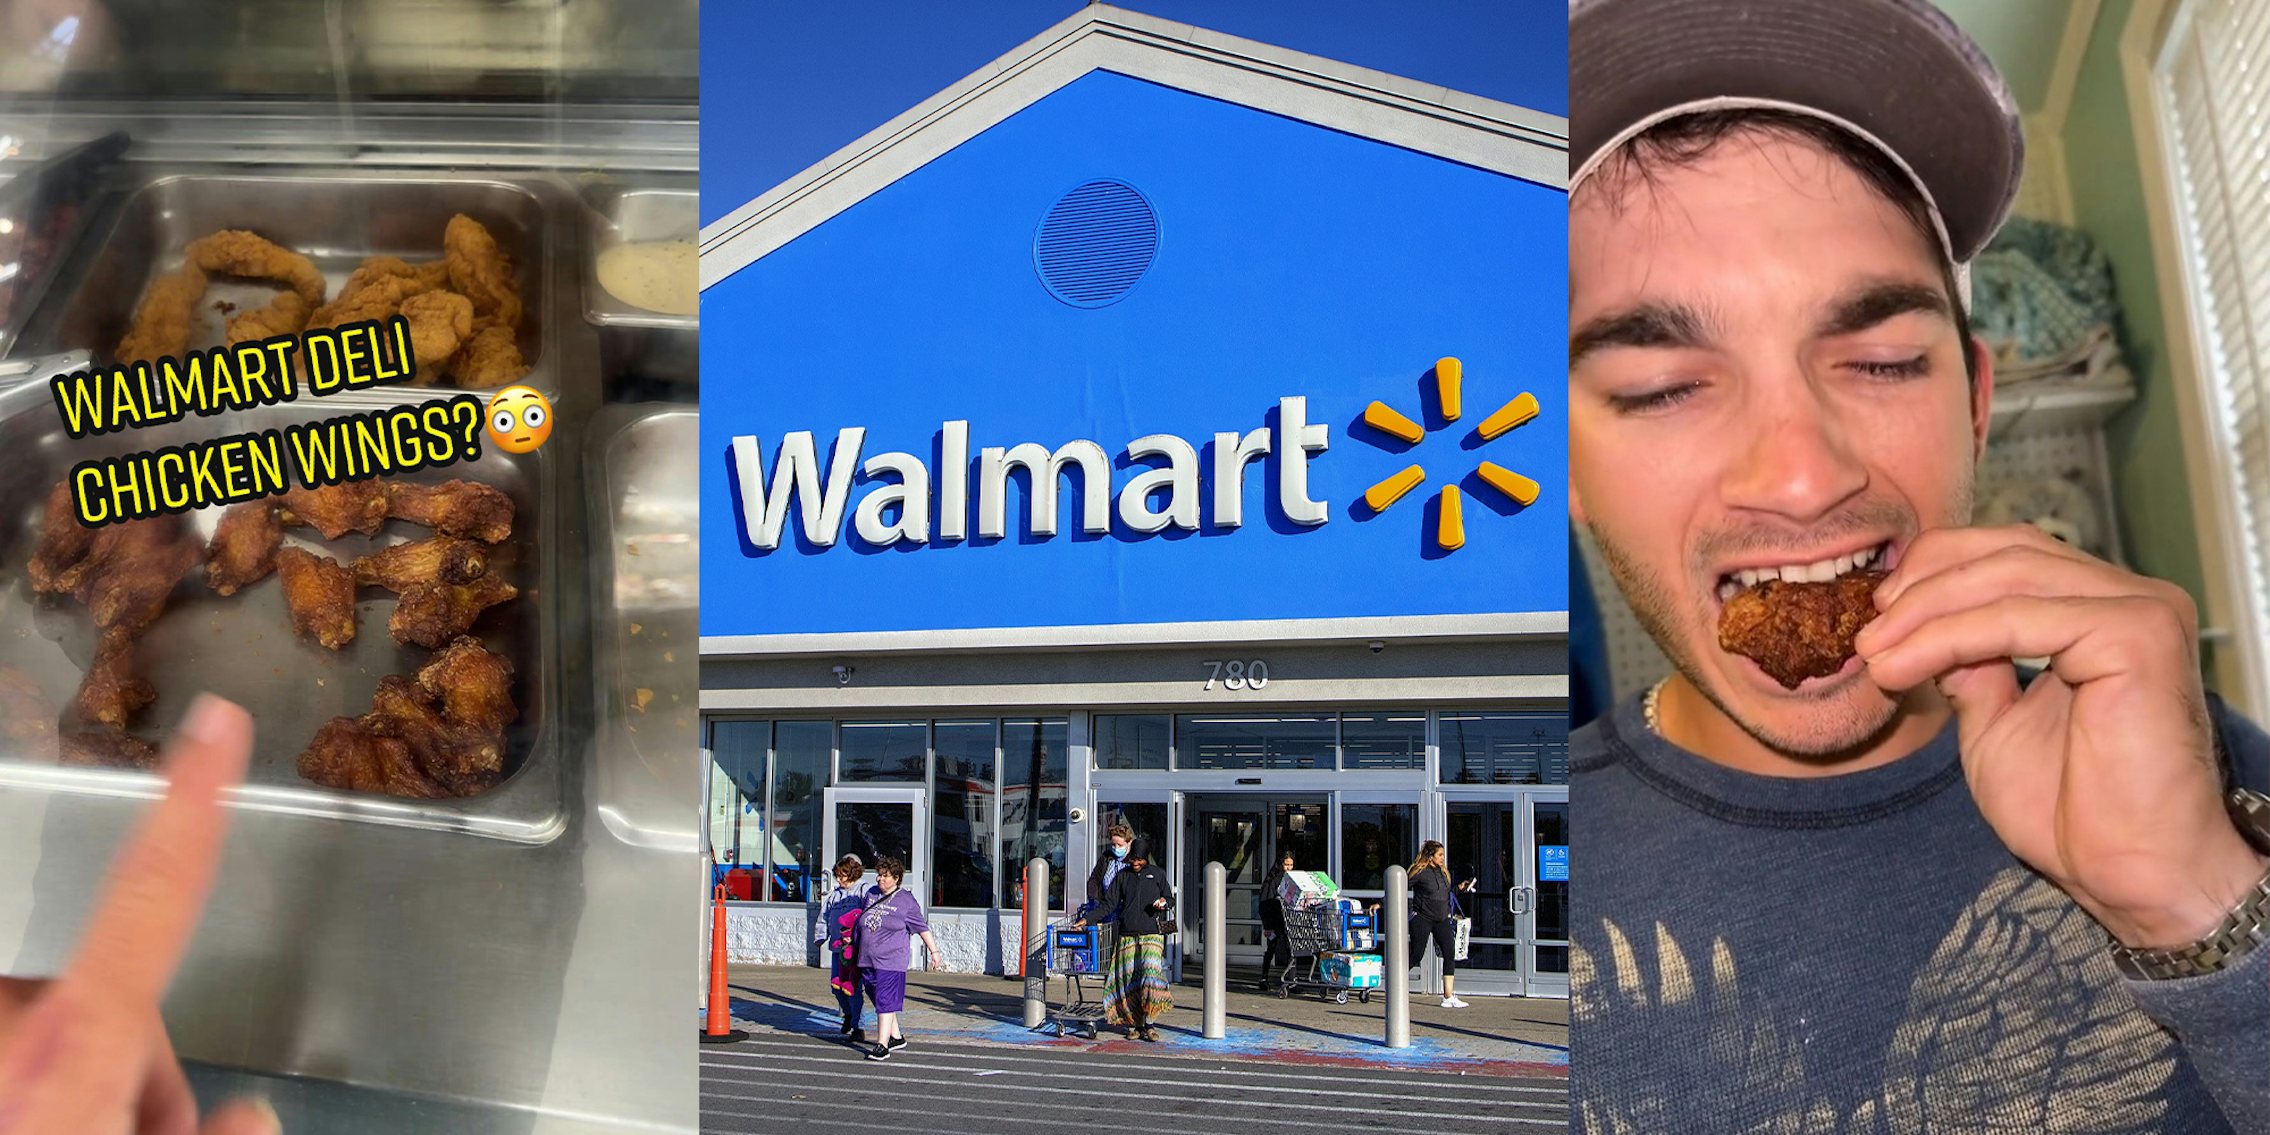 Young Man eats chicken wings from Walmart Deli